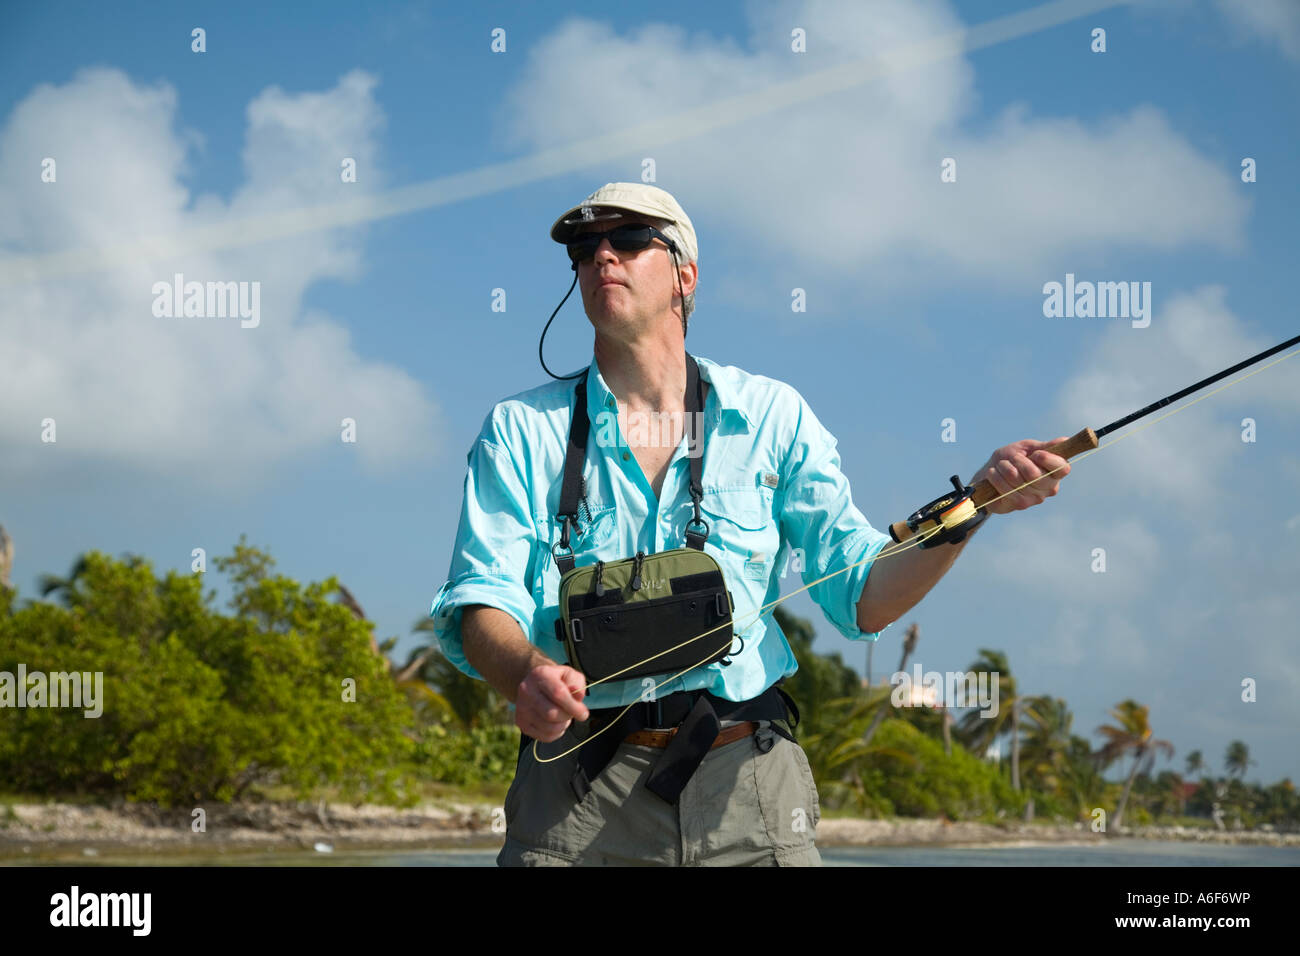 https://c8.alamy.com/comp/A6F6WP/belize-ambergris-caye-adult-male-fly-fishing-in-flats-along-shoreline-A6F6WP.jpg